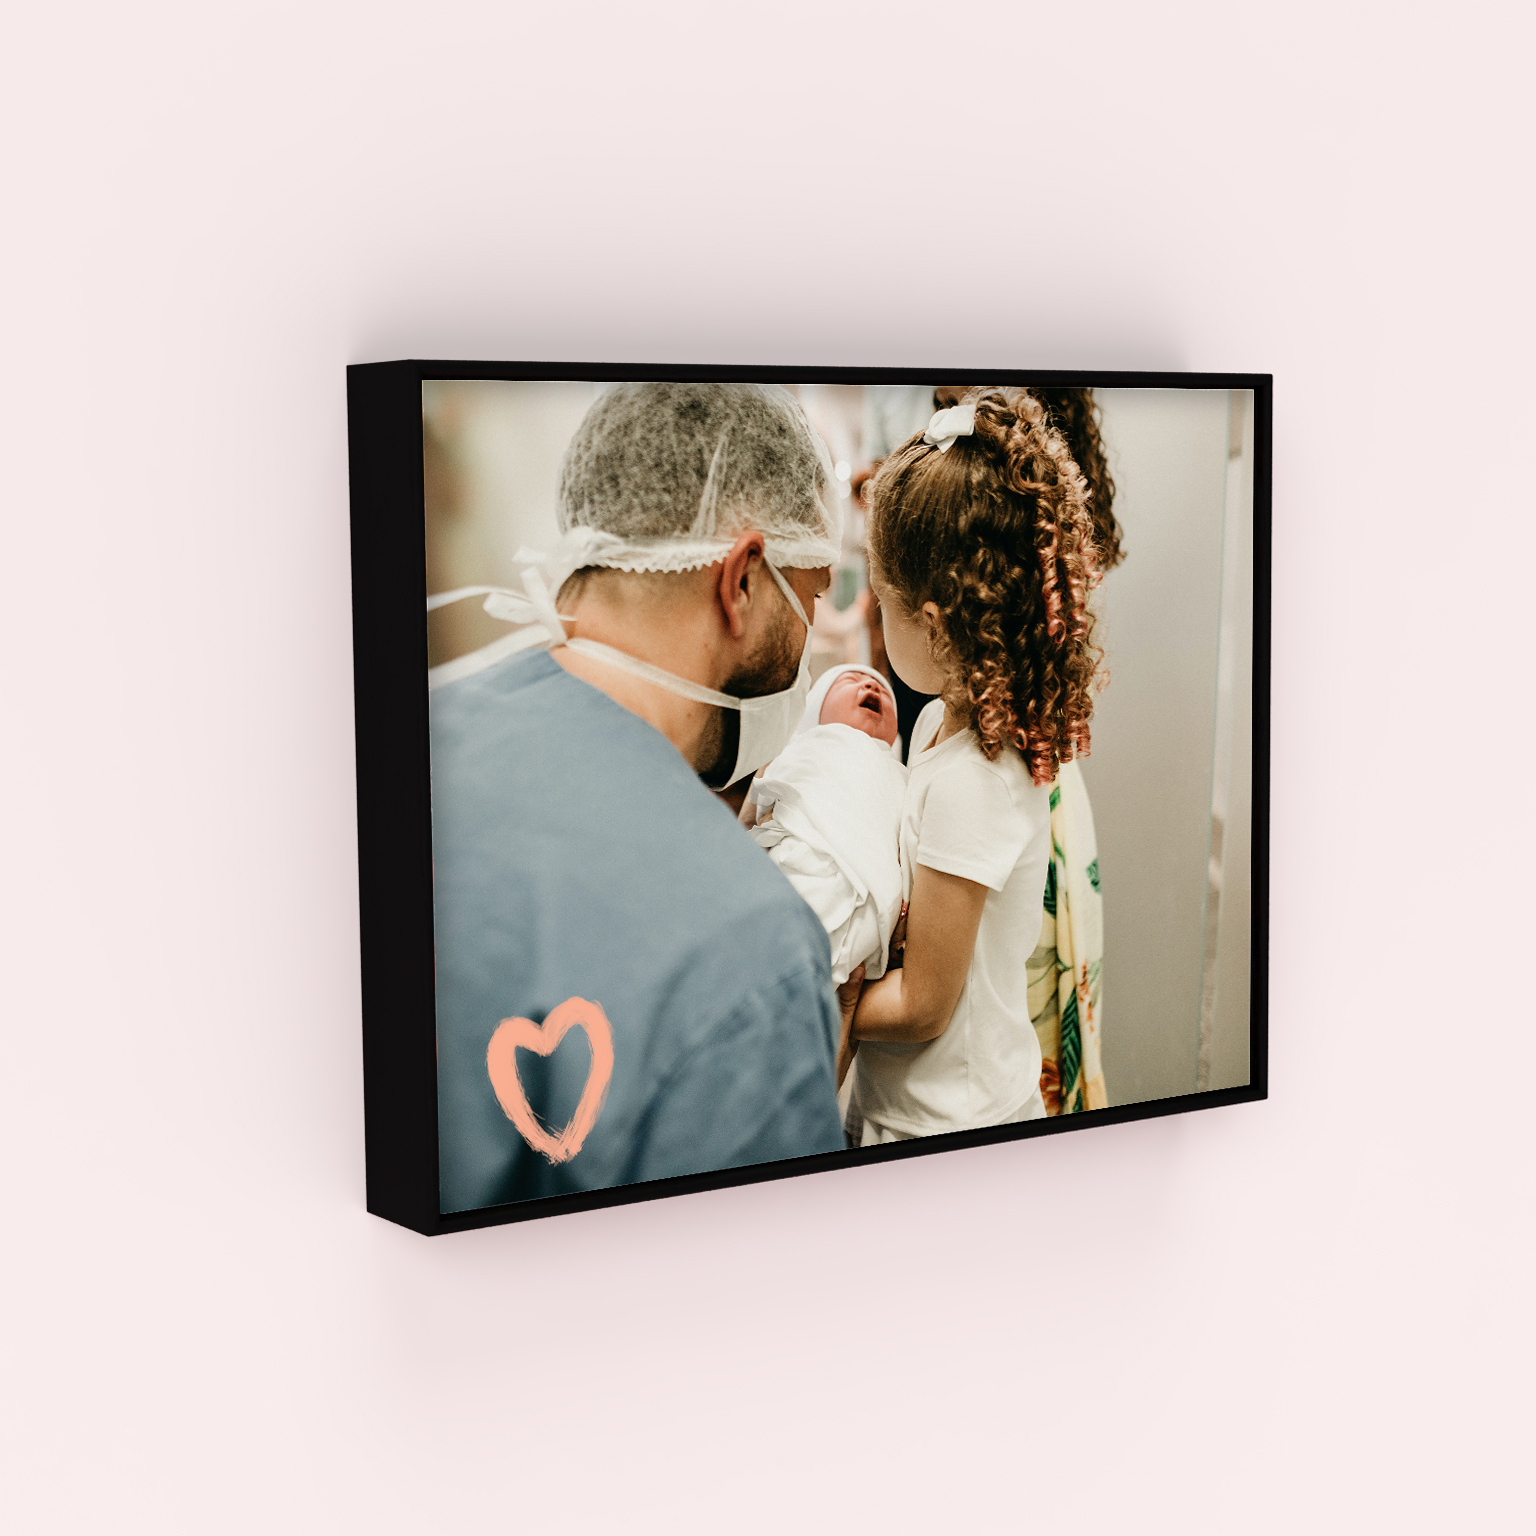 Framed Photo Canvases featuring Heart in the Corner design - Embrace joy with this high-resolution masterpiece